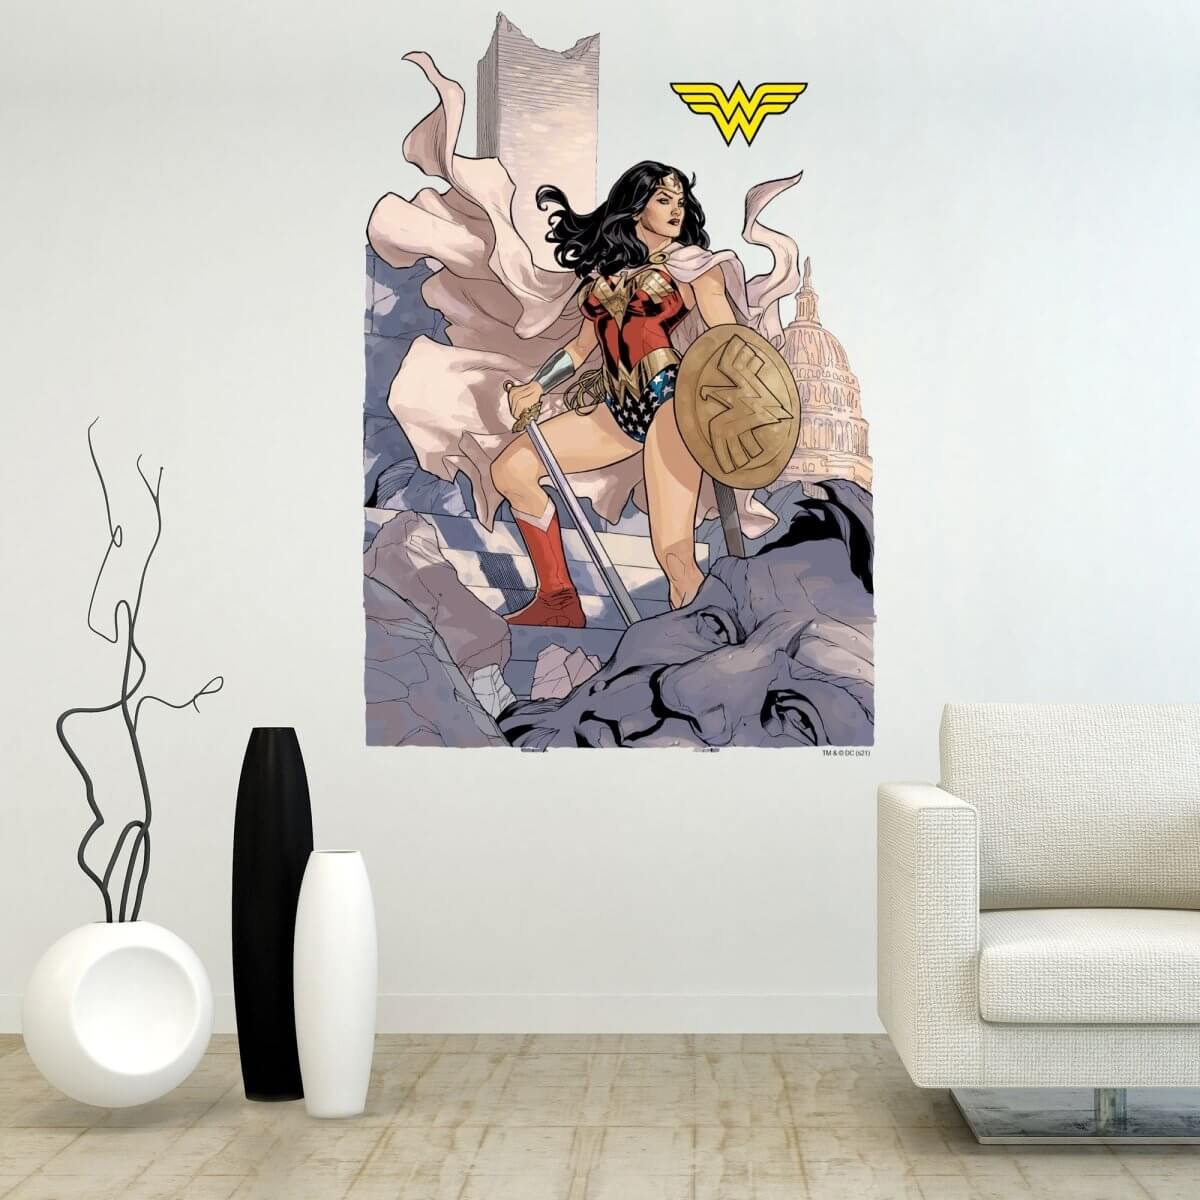 Kismet Decals Wonder Woman #13 Comic Cover Series Officially Licensed Wall Sticker - Easy DIY DC Comics Home, Kids or Adult Bedroom, Office, Living Room Decor Wall Art - Kismet Decals